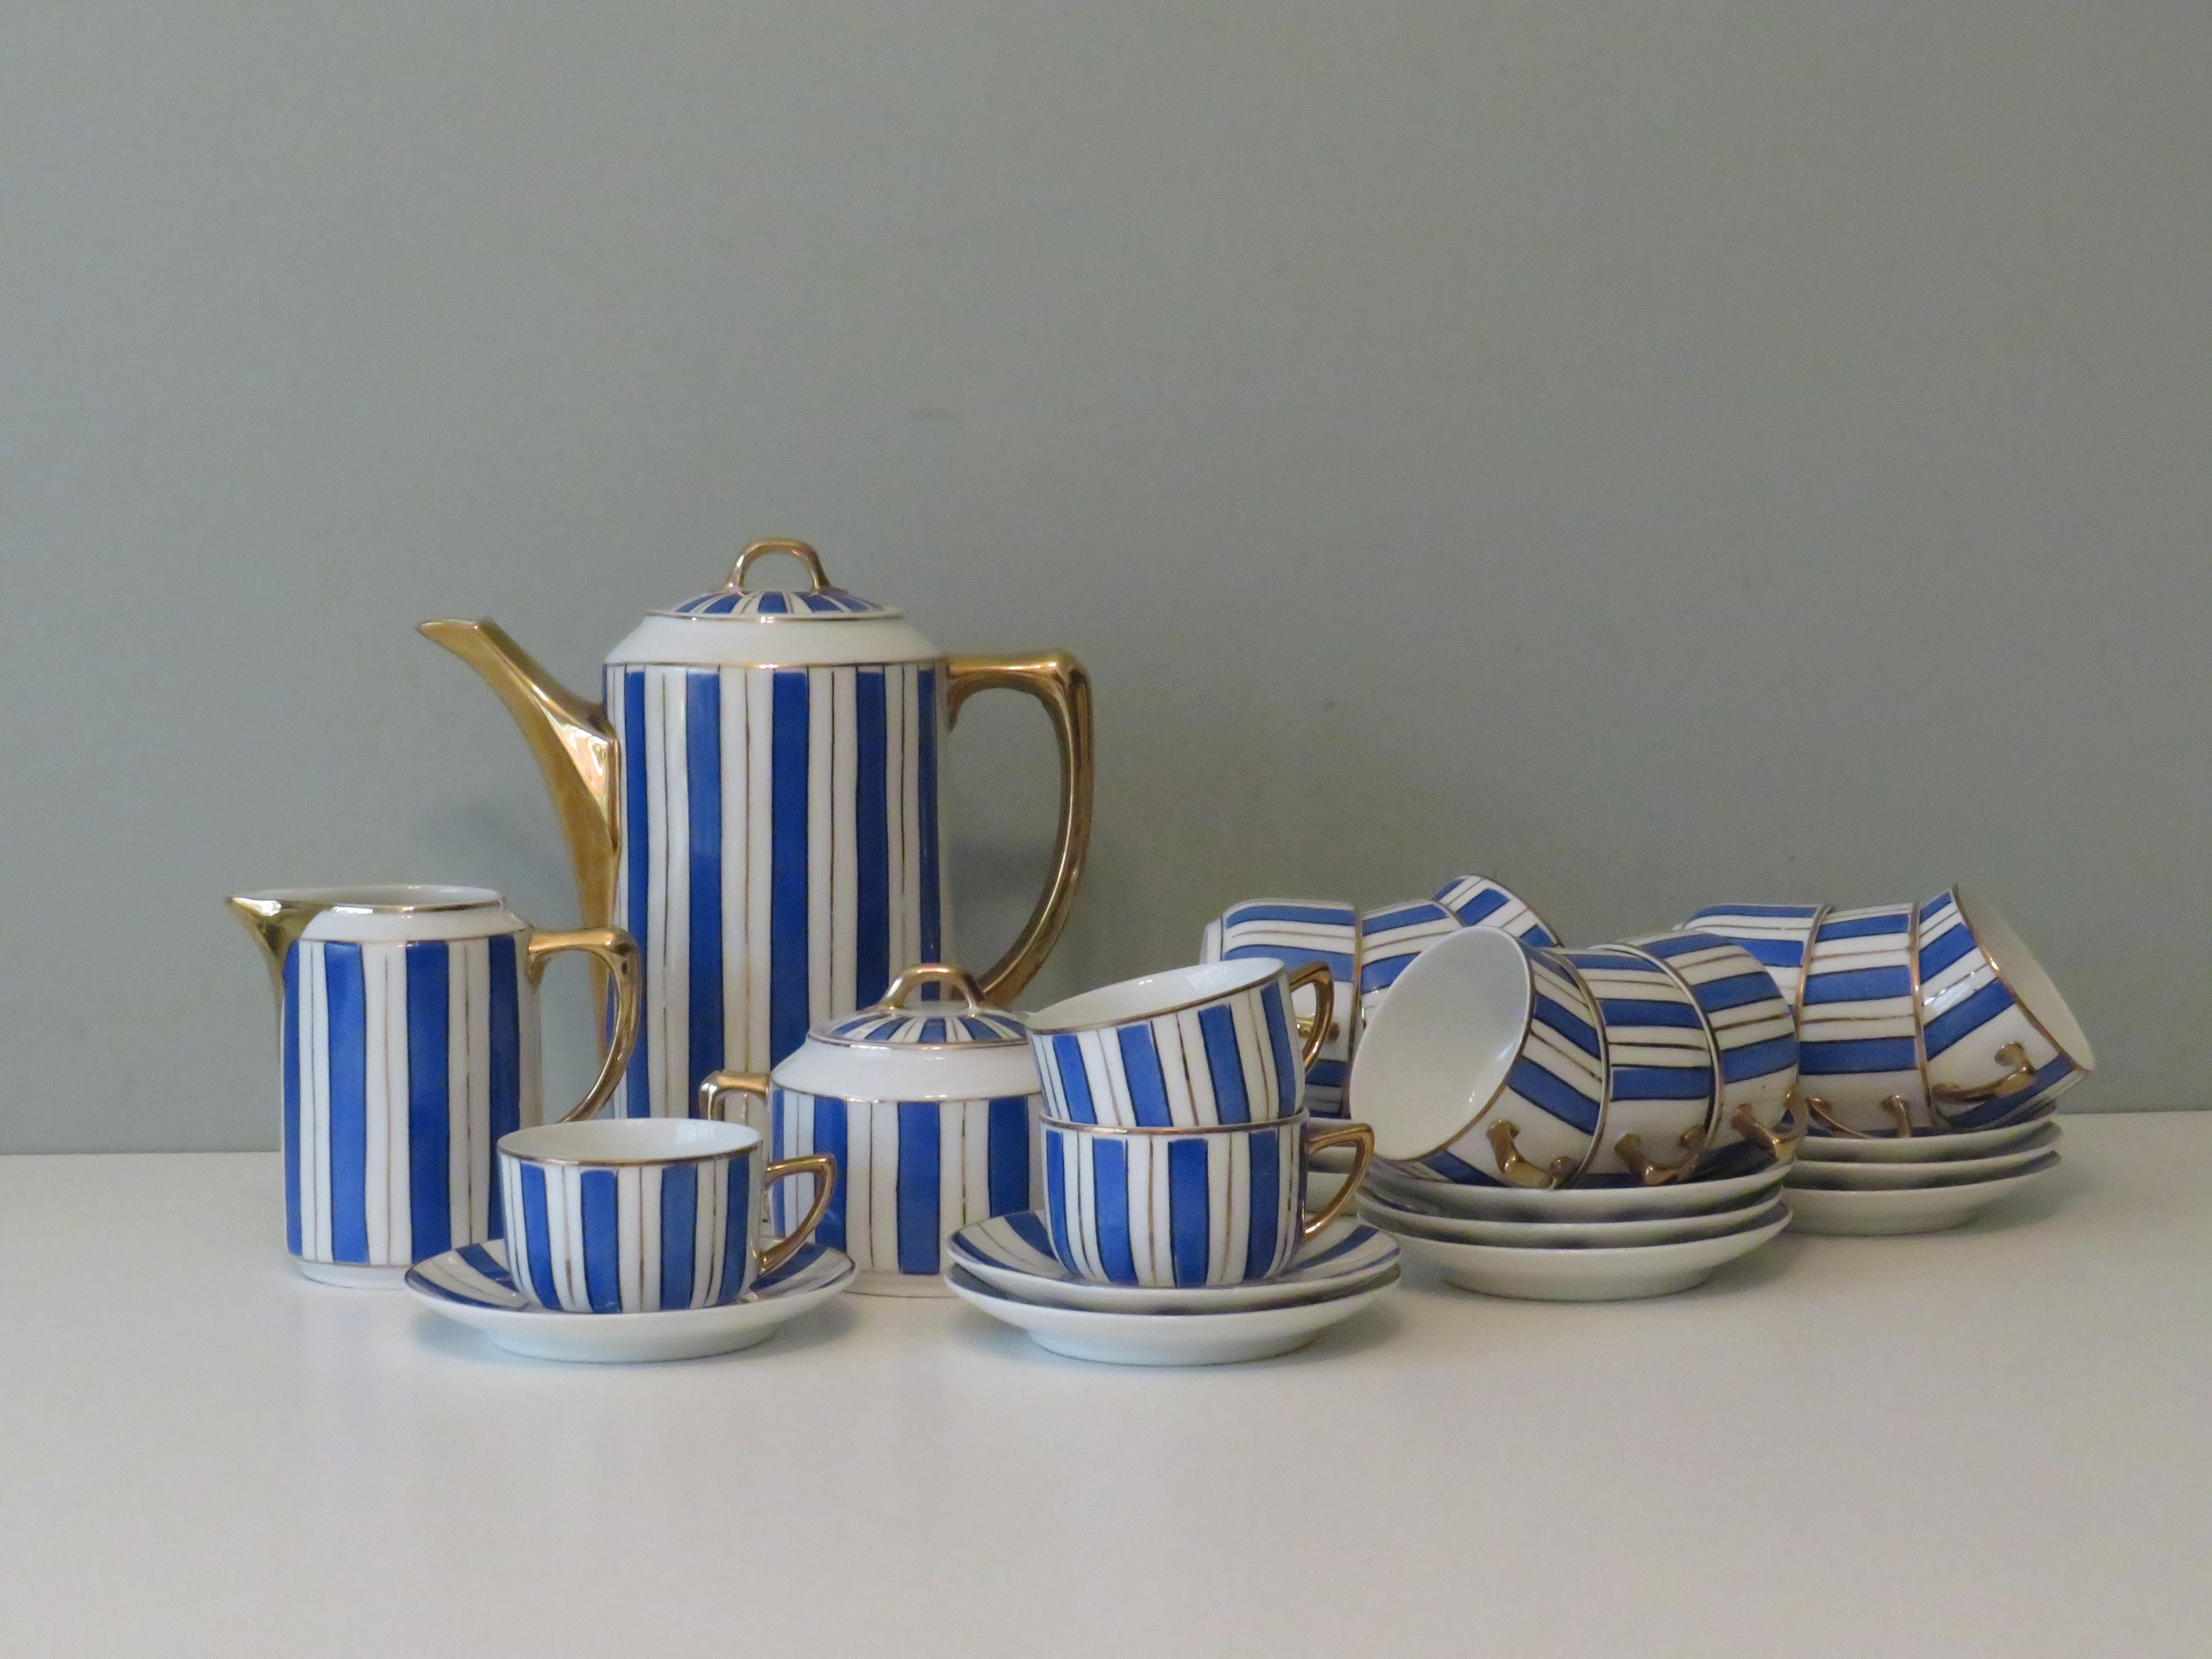 Heavily gilded and hand-painted Belle Epoque coffee service by De Fuisseaux, Baudour Belgium. Each part of the service is stamped and the stamp can be used to date it between 1847 and 1934.
There are 12 coffee cups with saucers, a milk jug, a sugar